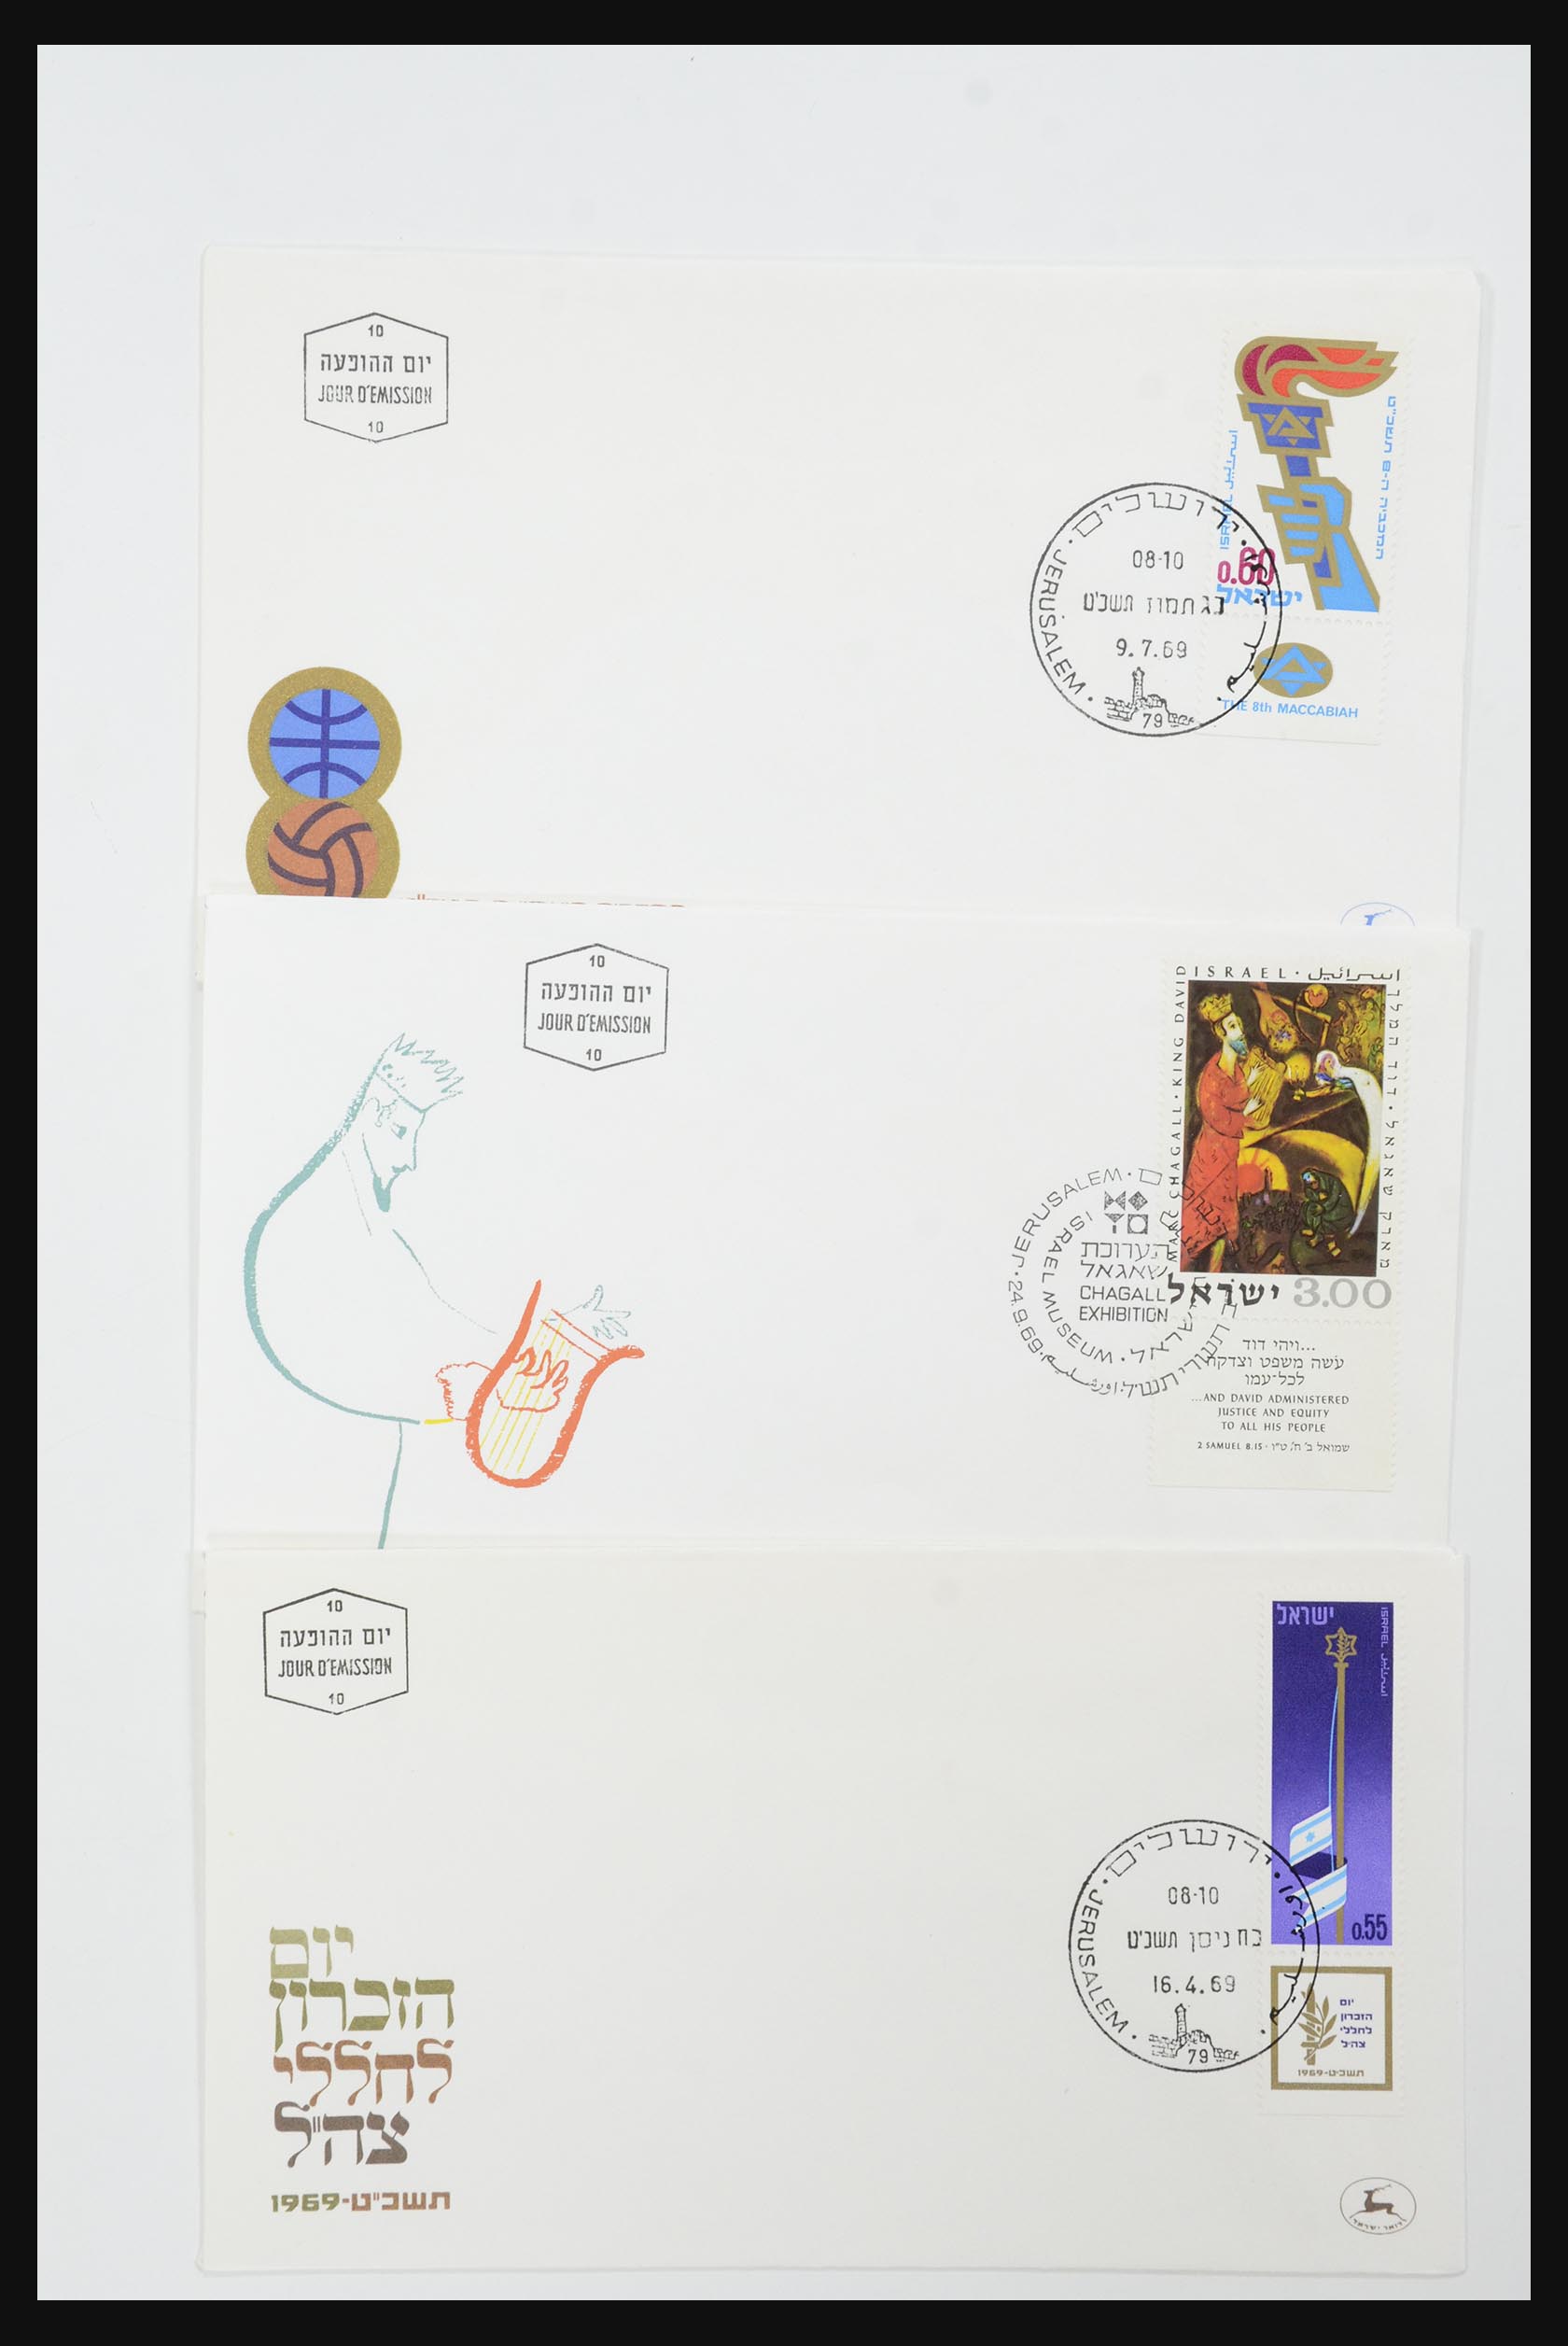 31924 578 - 31924 Israel first day cover collection 1957-2003.